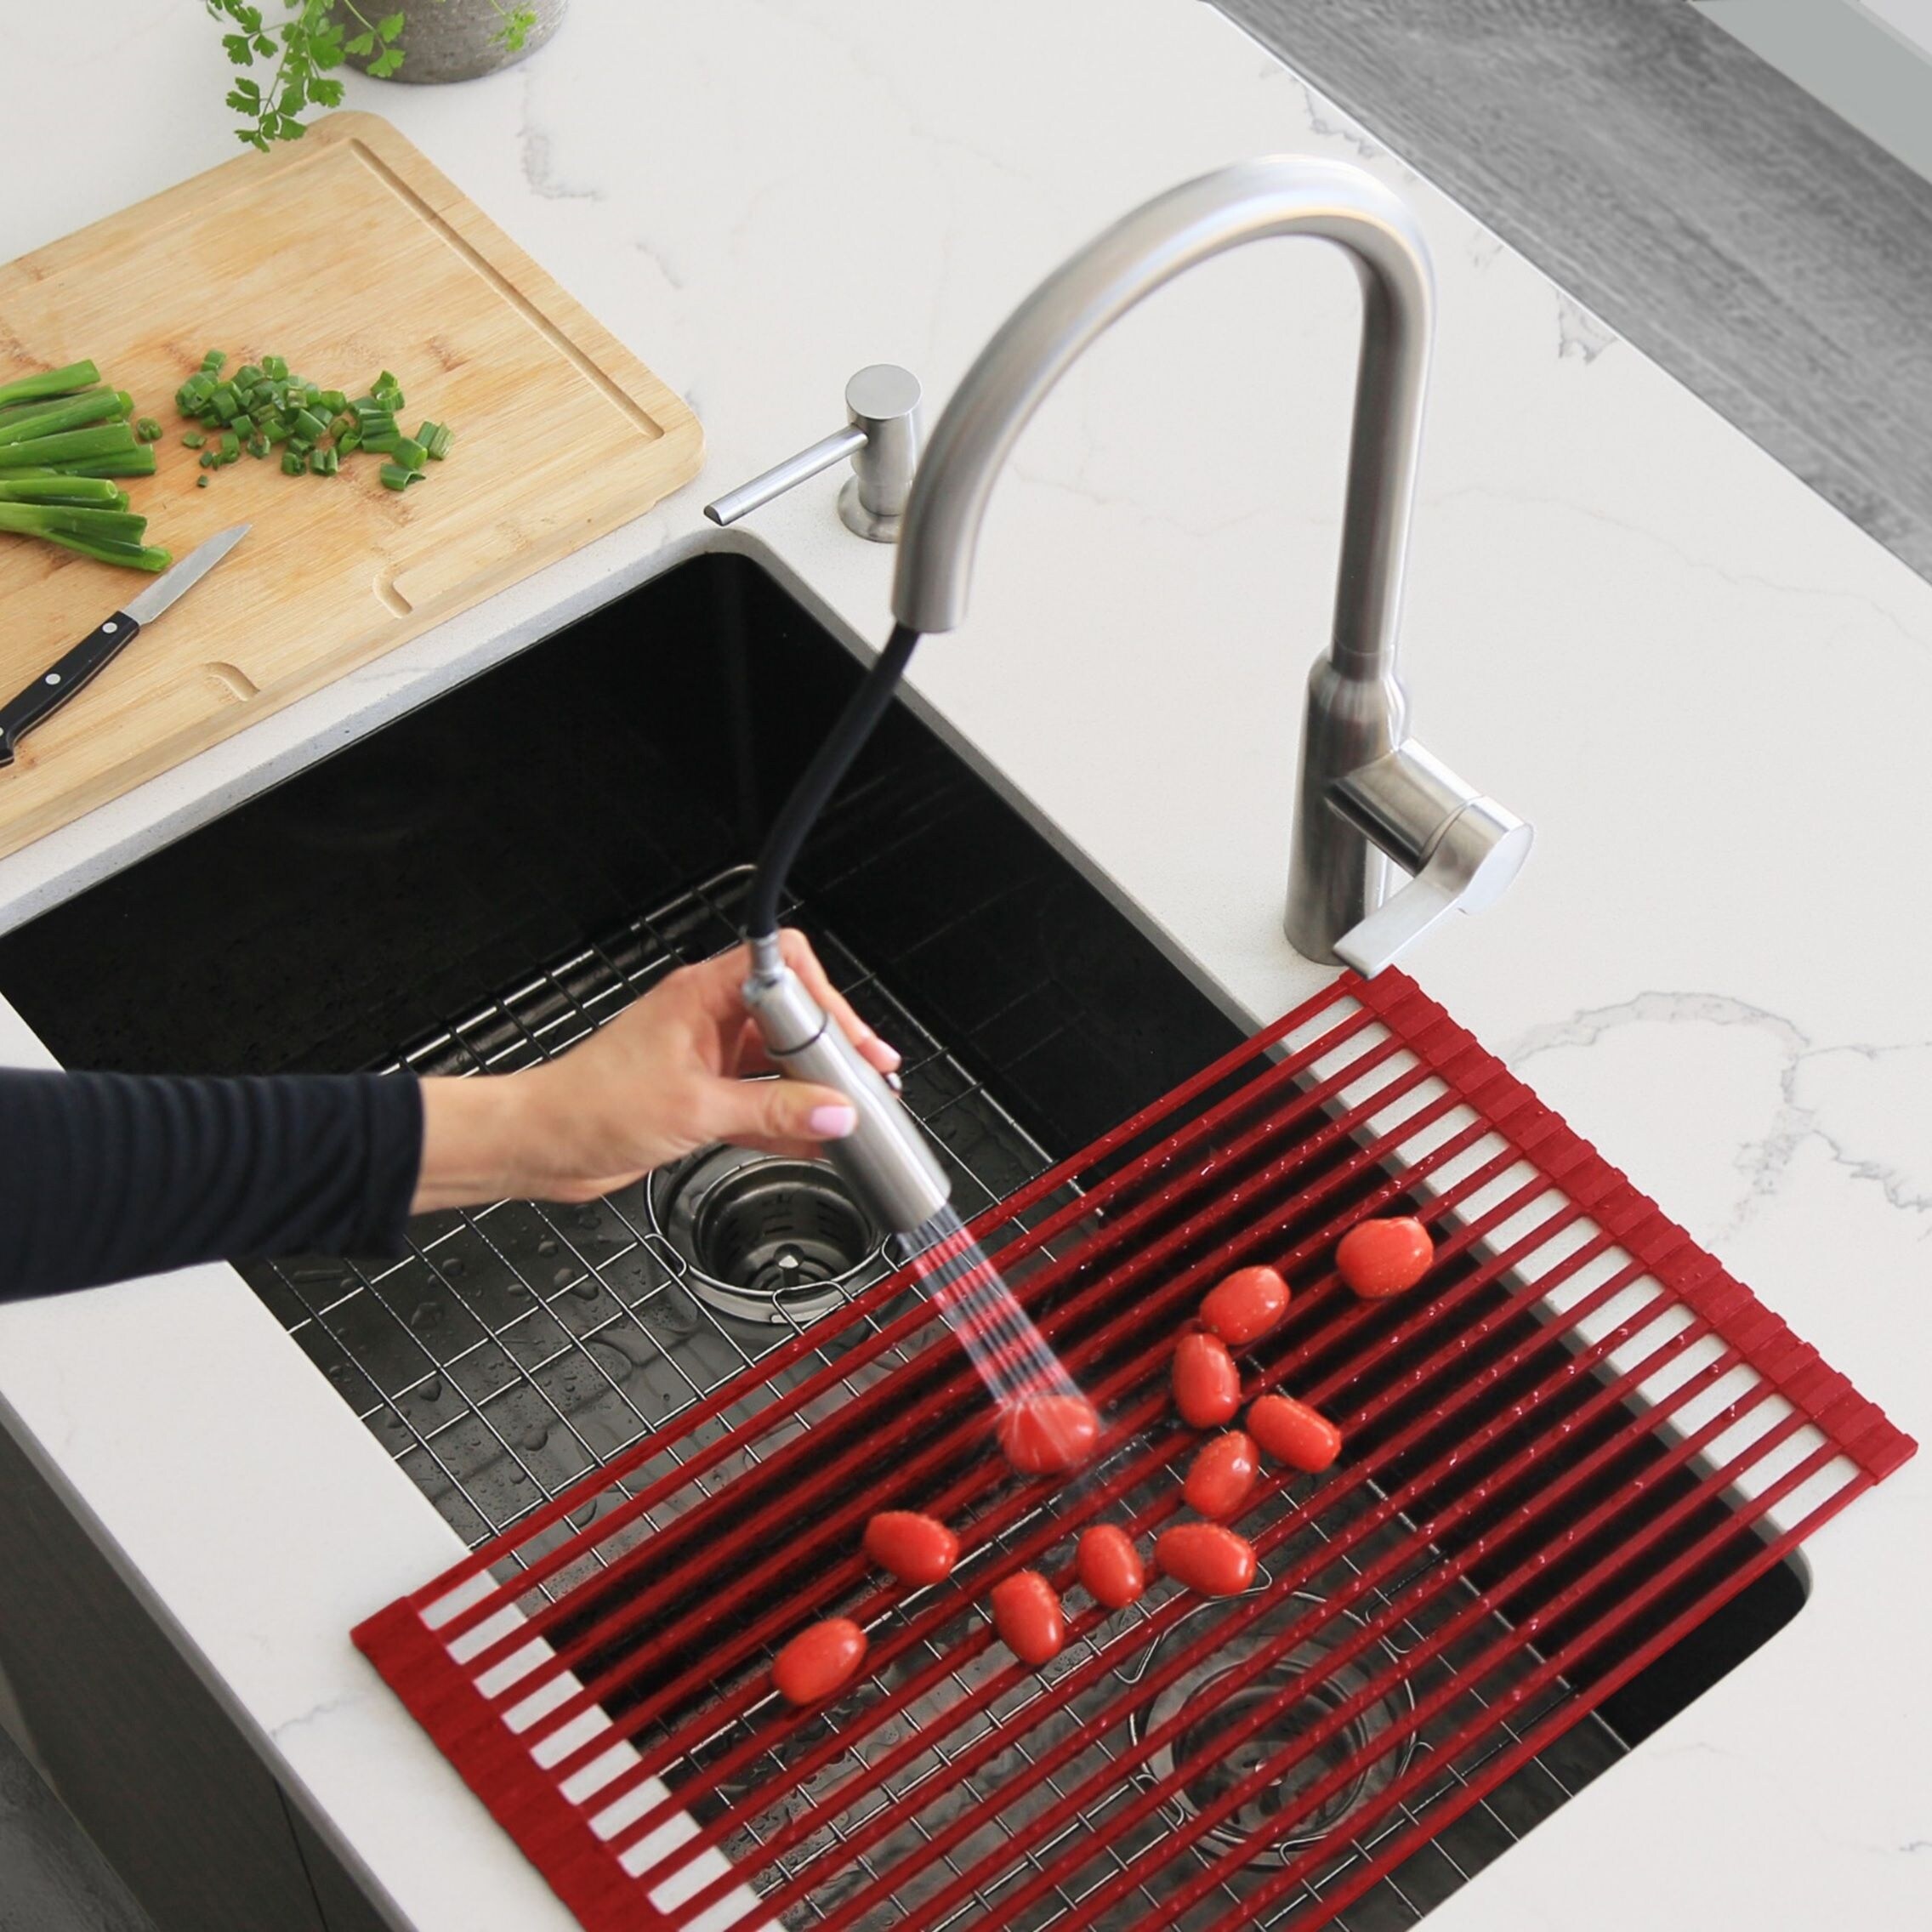 https://ak1.ostkcdn.com/images/products/is/images/direct/e5f6521aab1ac2e3edab8176b1043e9237a0367b/STYLISH-Multipurpose-Over-Sink-Roll-Up-Dish-Drying-Rack.jpg